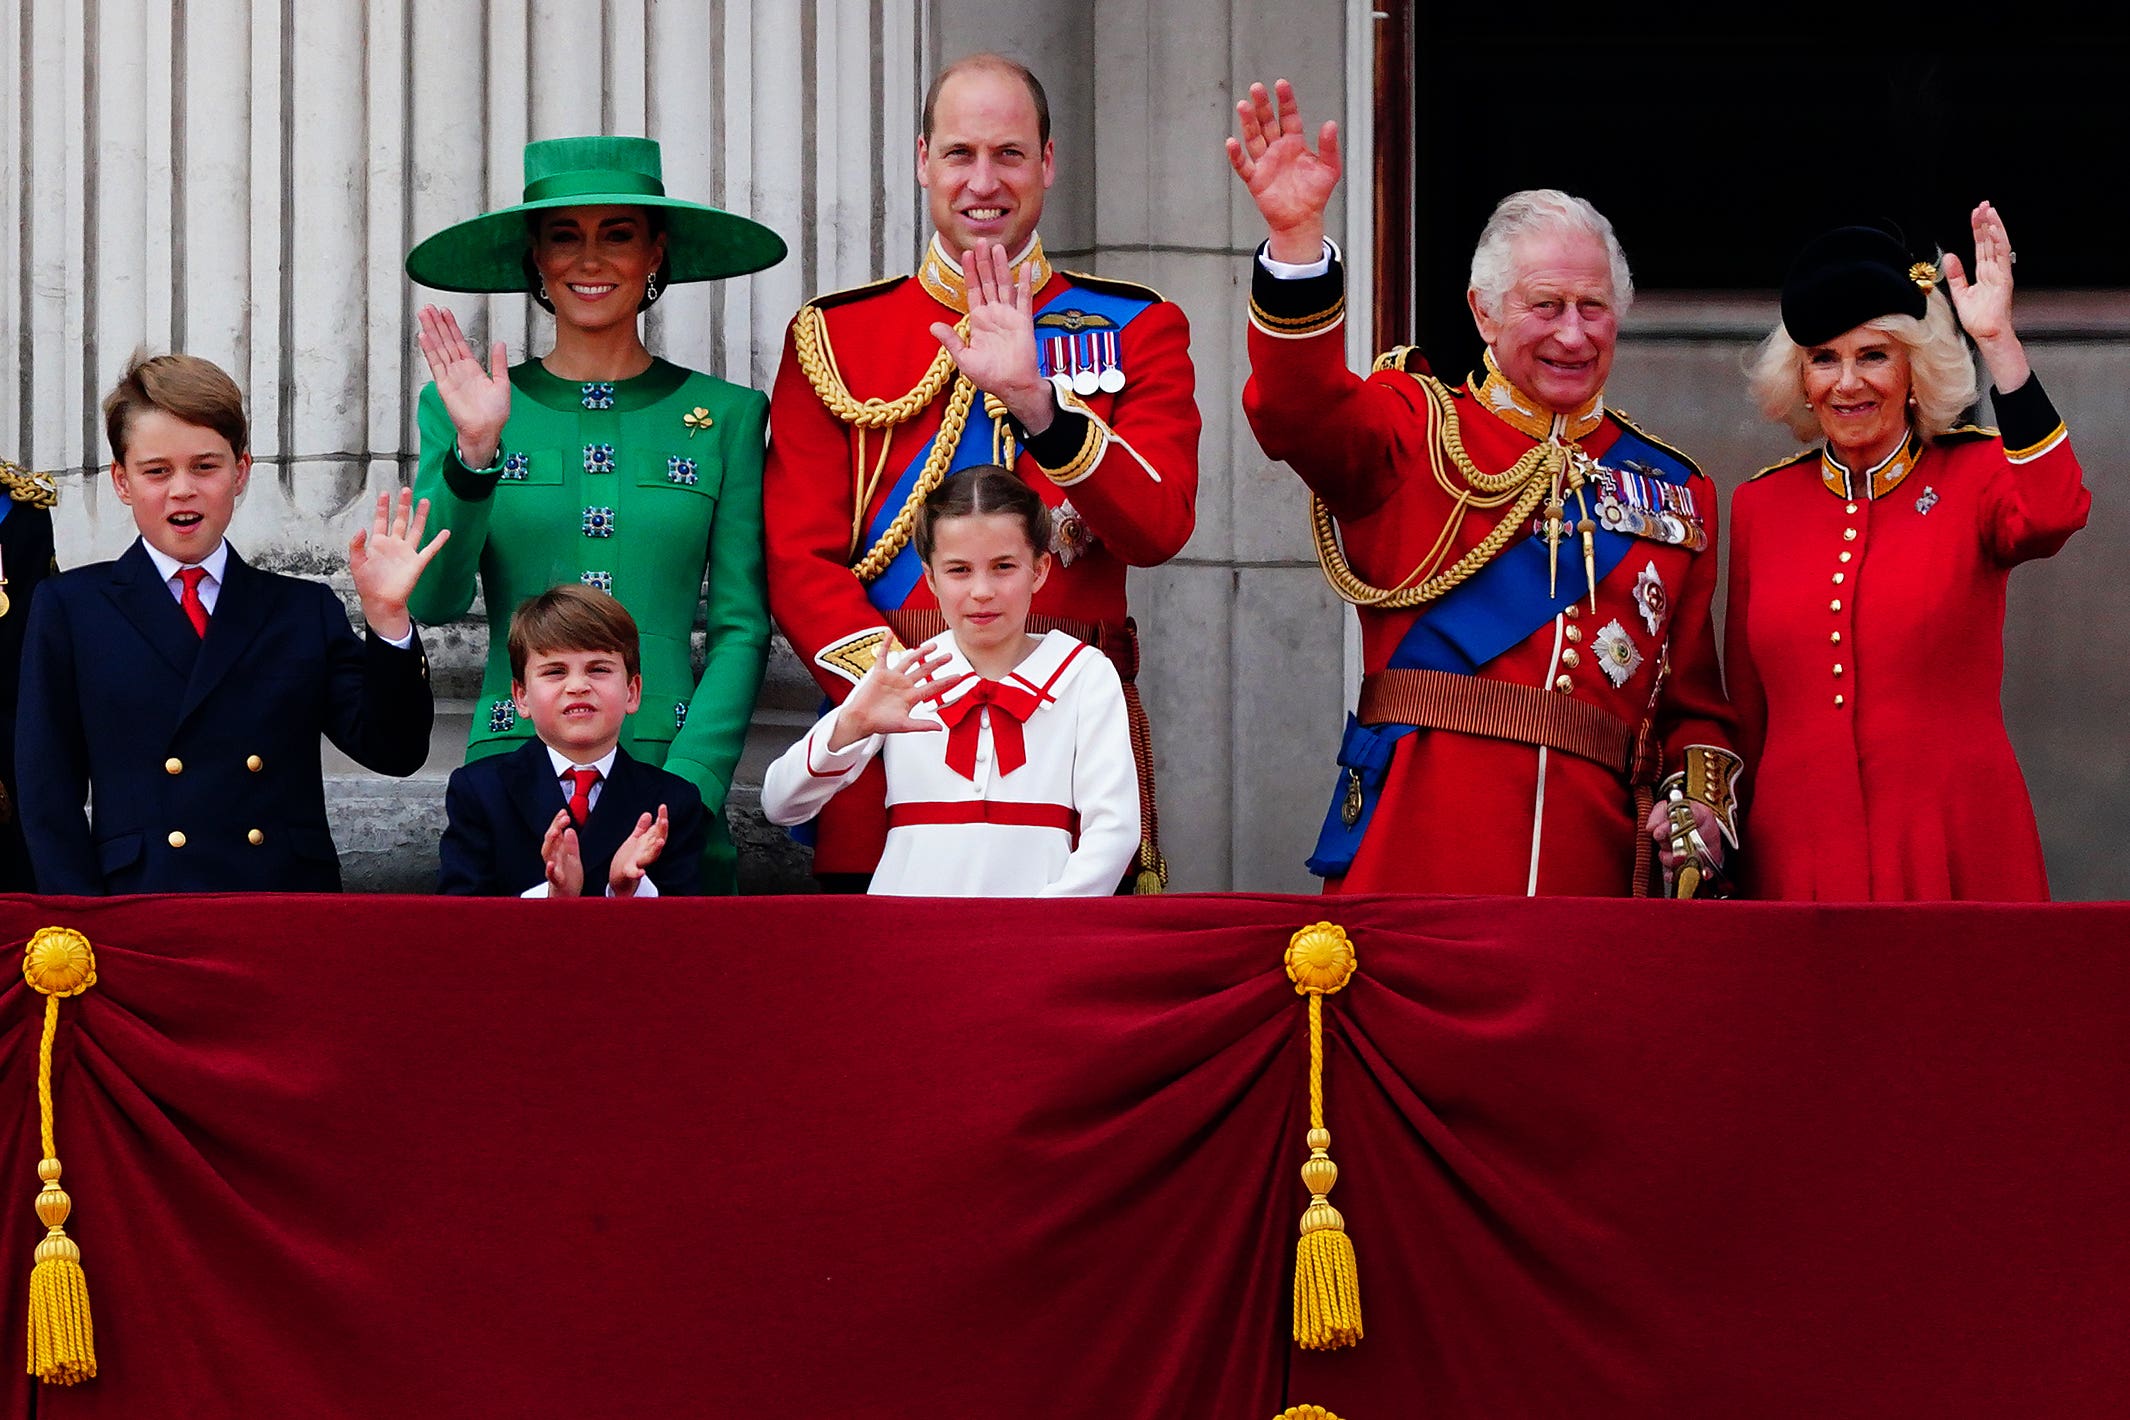 Kate Middleton could be making a surprise appearance at this year’s Trooping the Colour (Victoria Jones/PA)